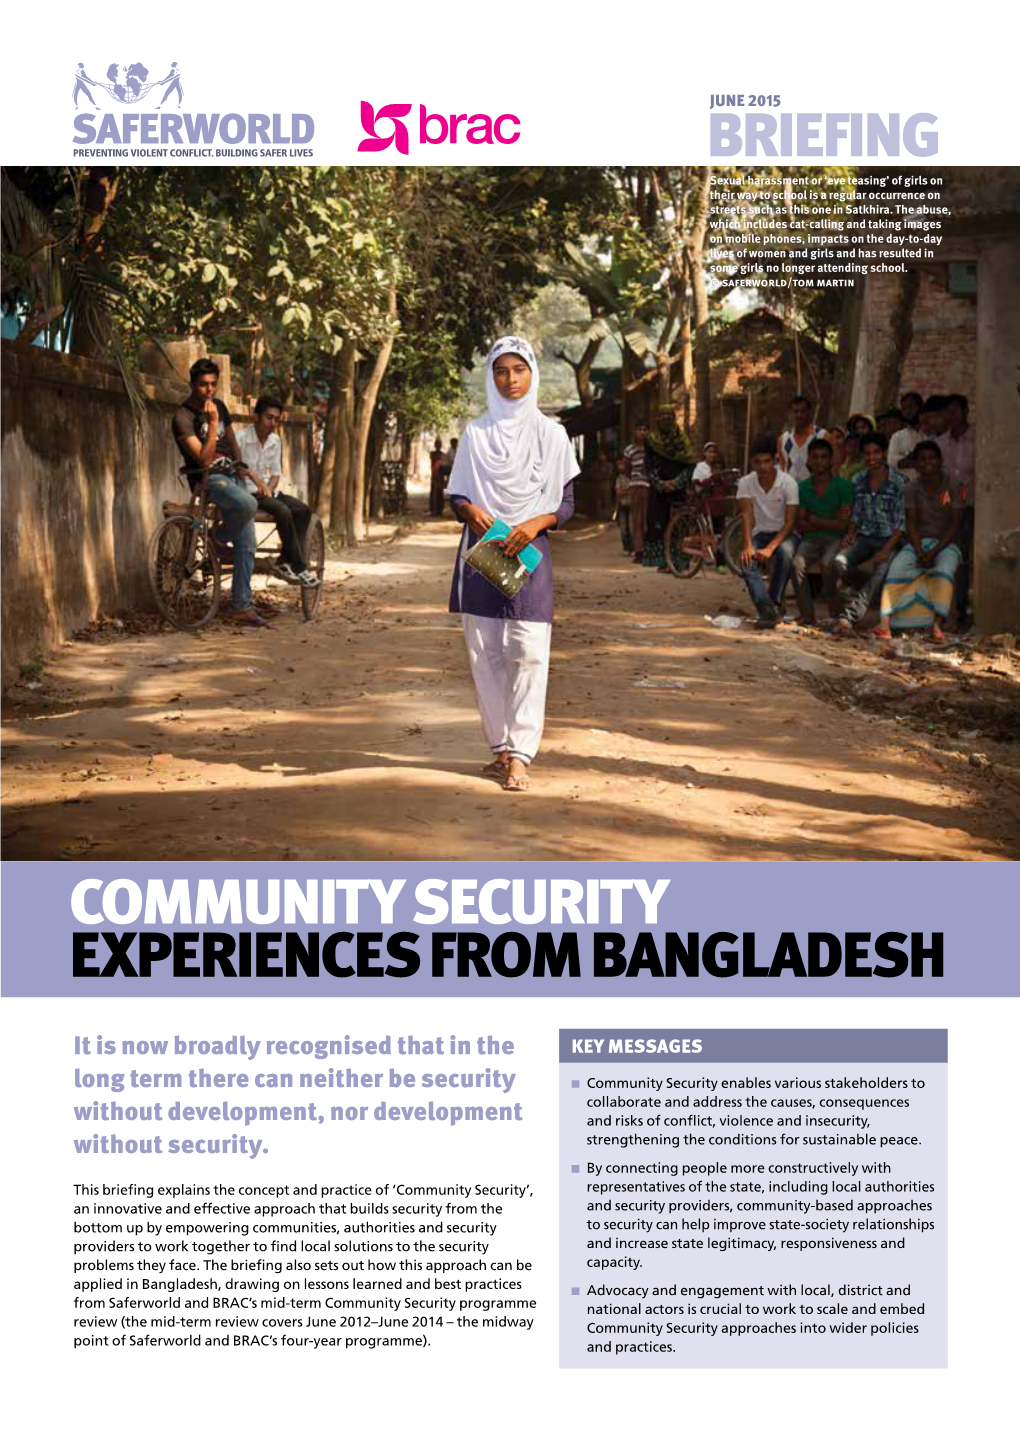 COMMUNITY SECURITY Experiences from Bangladesh